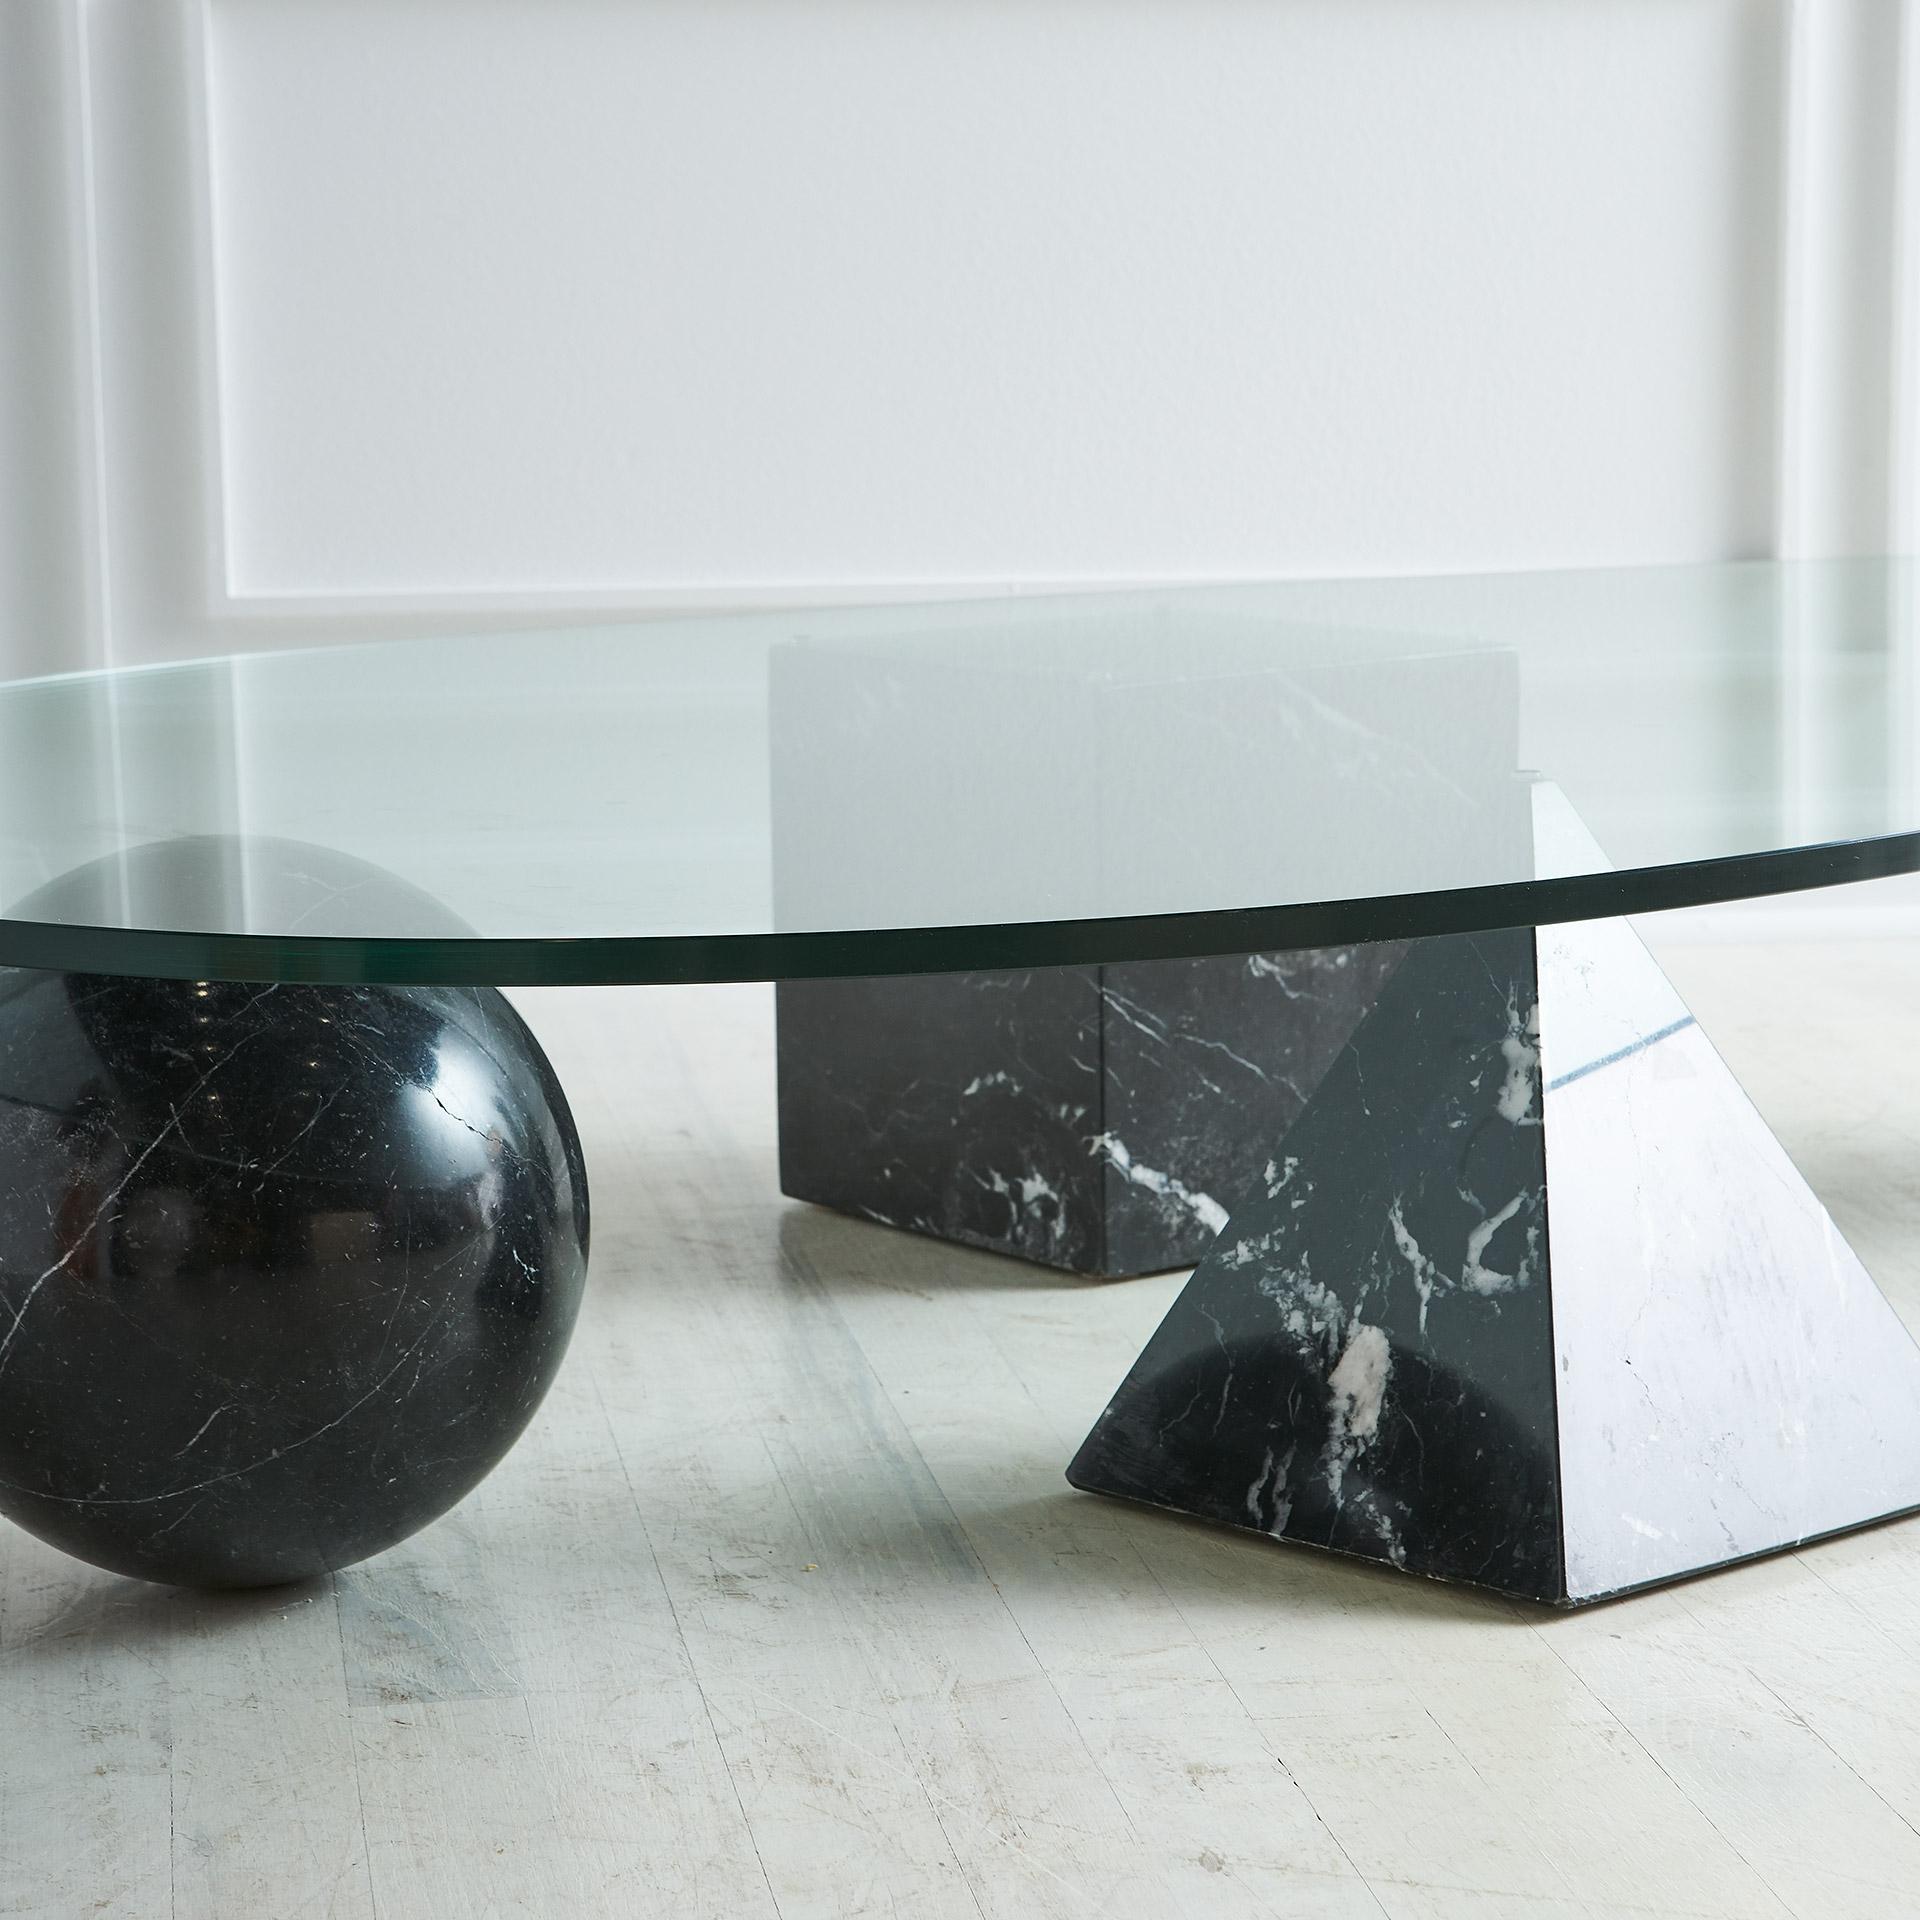 Massimo Vignelli for Martinelli Luce. Italian, late 1970s. This table features four geometric shapes in solid Nero Marquina Marble and is completed with a kidney shaped glass top. The four geometric pieces can be freely positioned for a variety of